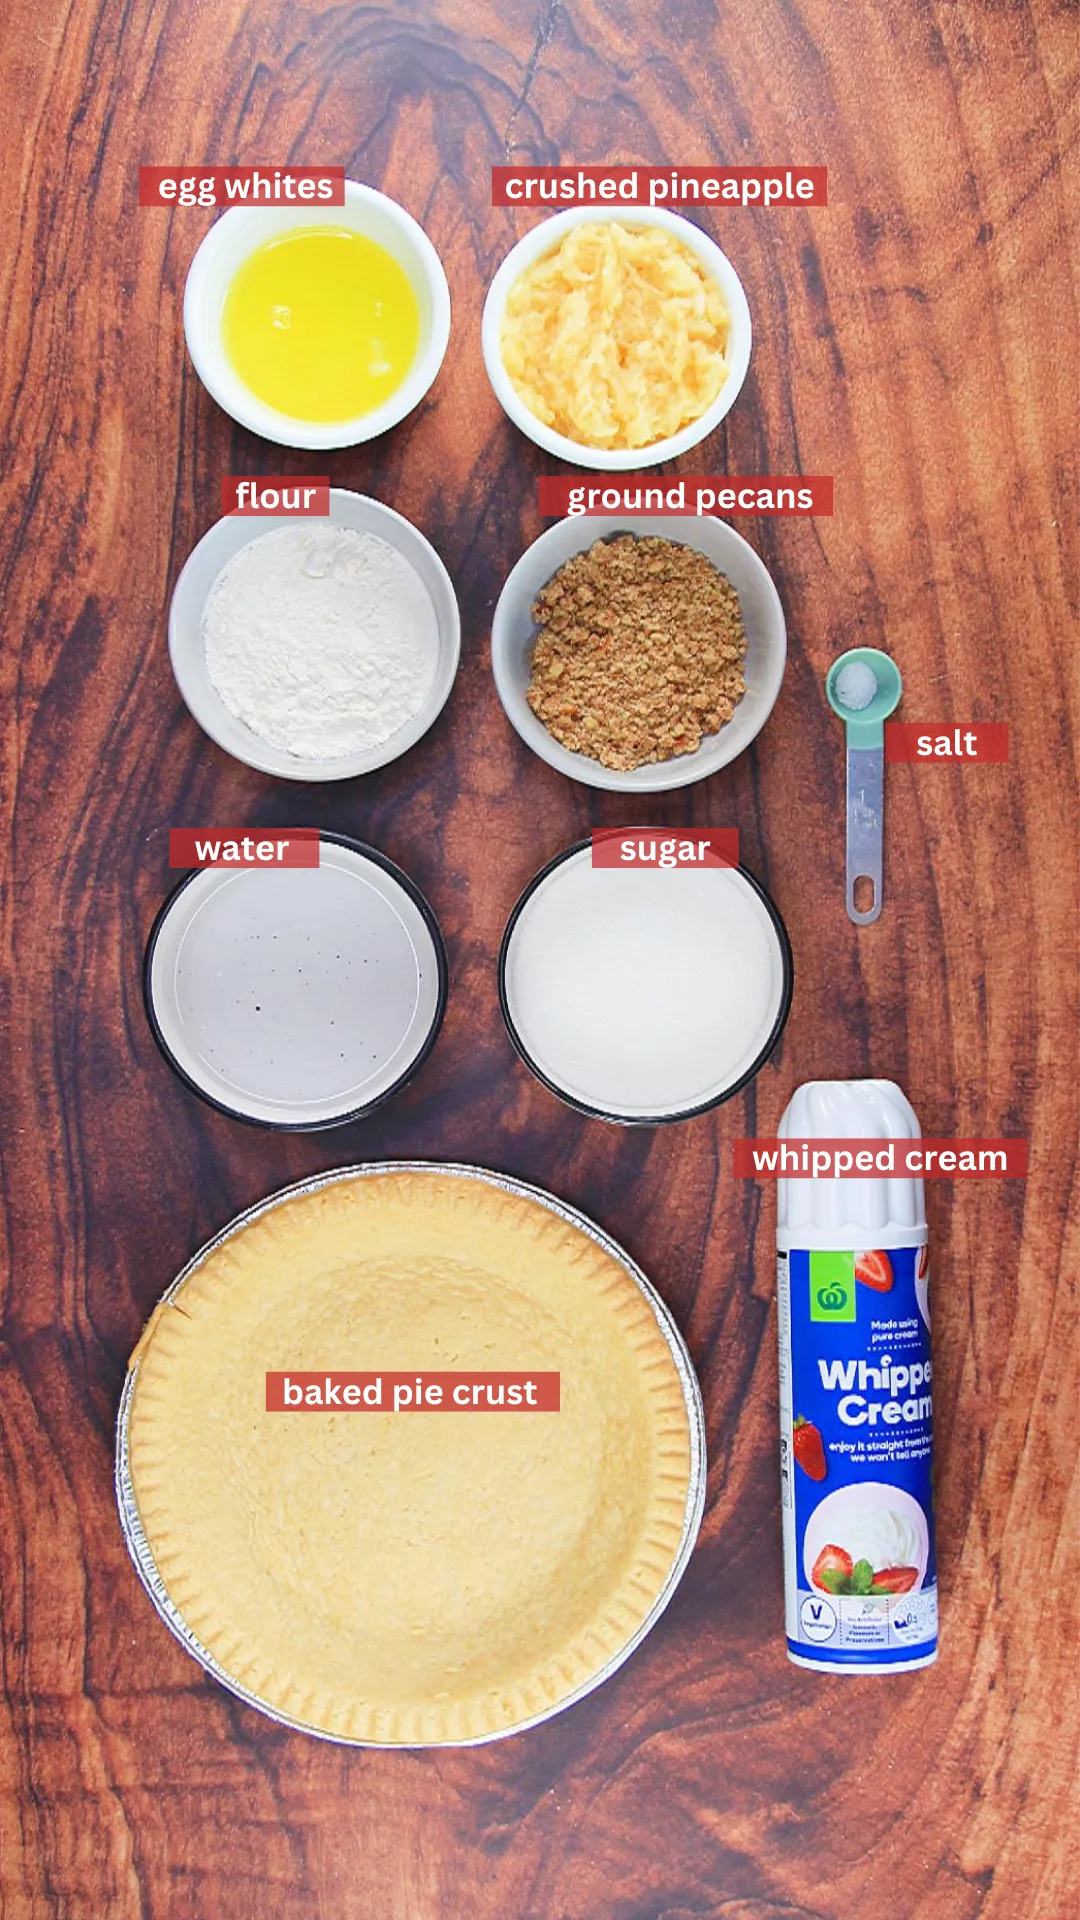 Ingredients for a Angel Food Pie including a baked pie crust, crushed pineapple, crush pecans, whipped cream, sugar, water, flour, and egg whites. Hostess At Heart